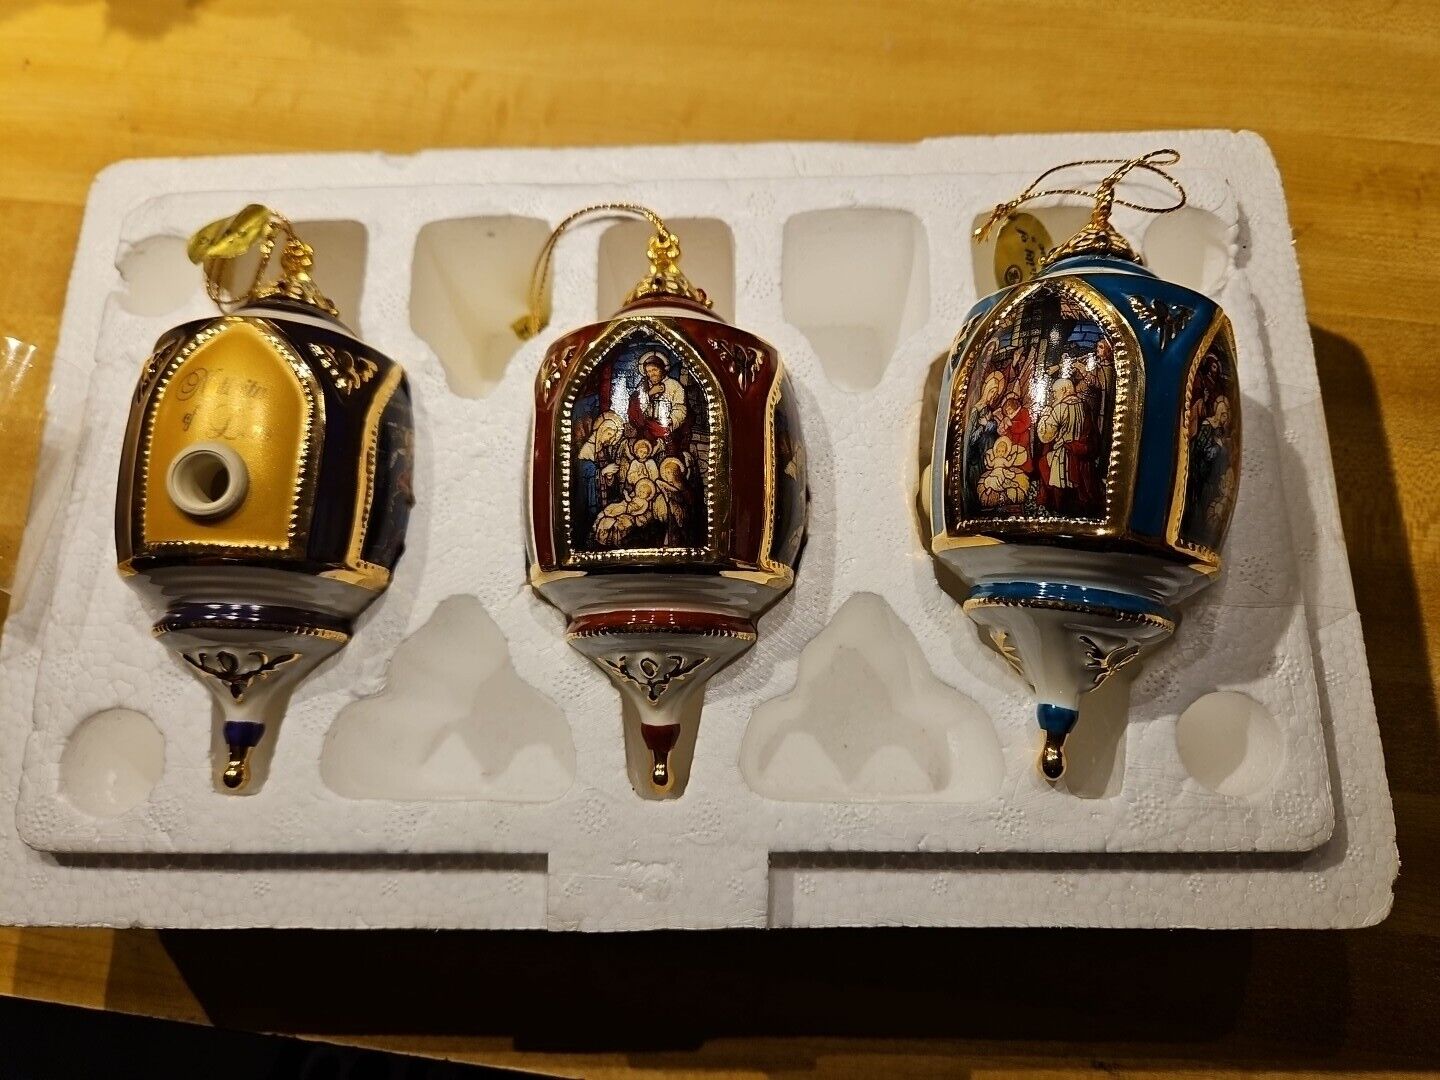 Bradford Editions 3 Different 2000 Nativity Miracles of Light Ornaments Very Nic